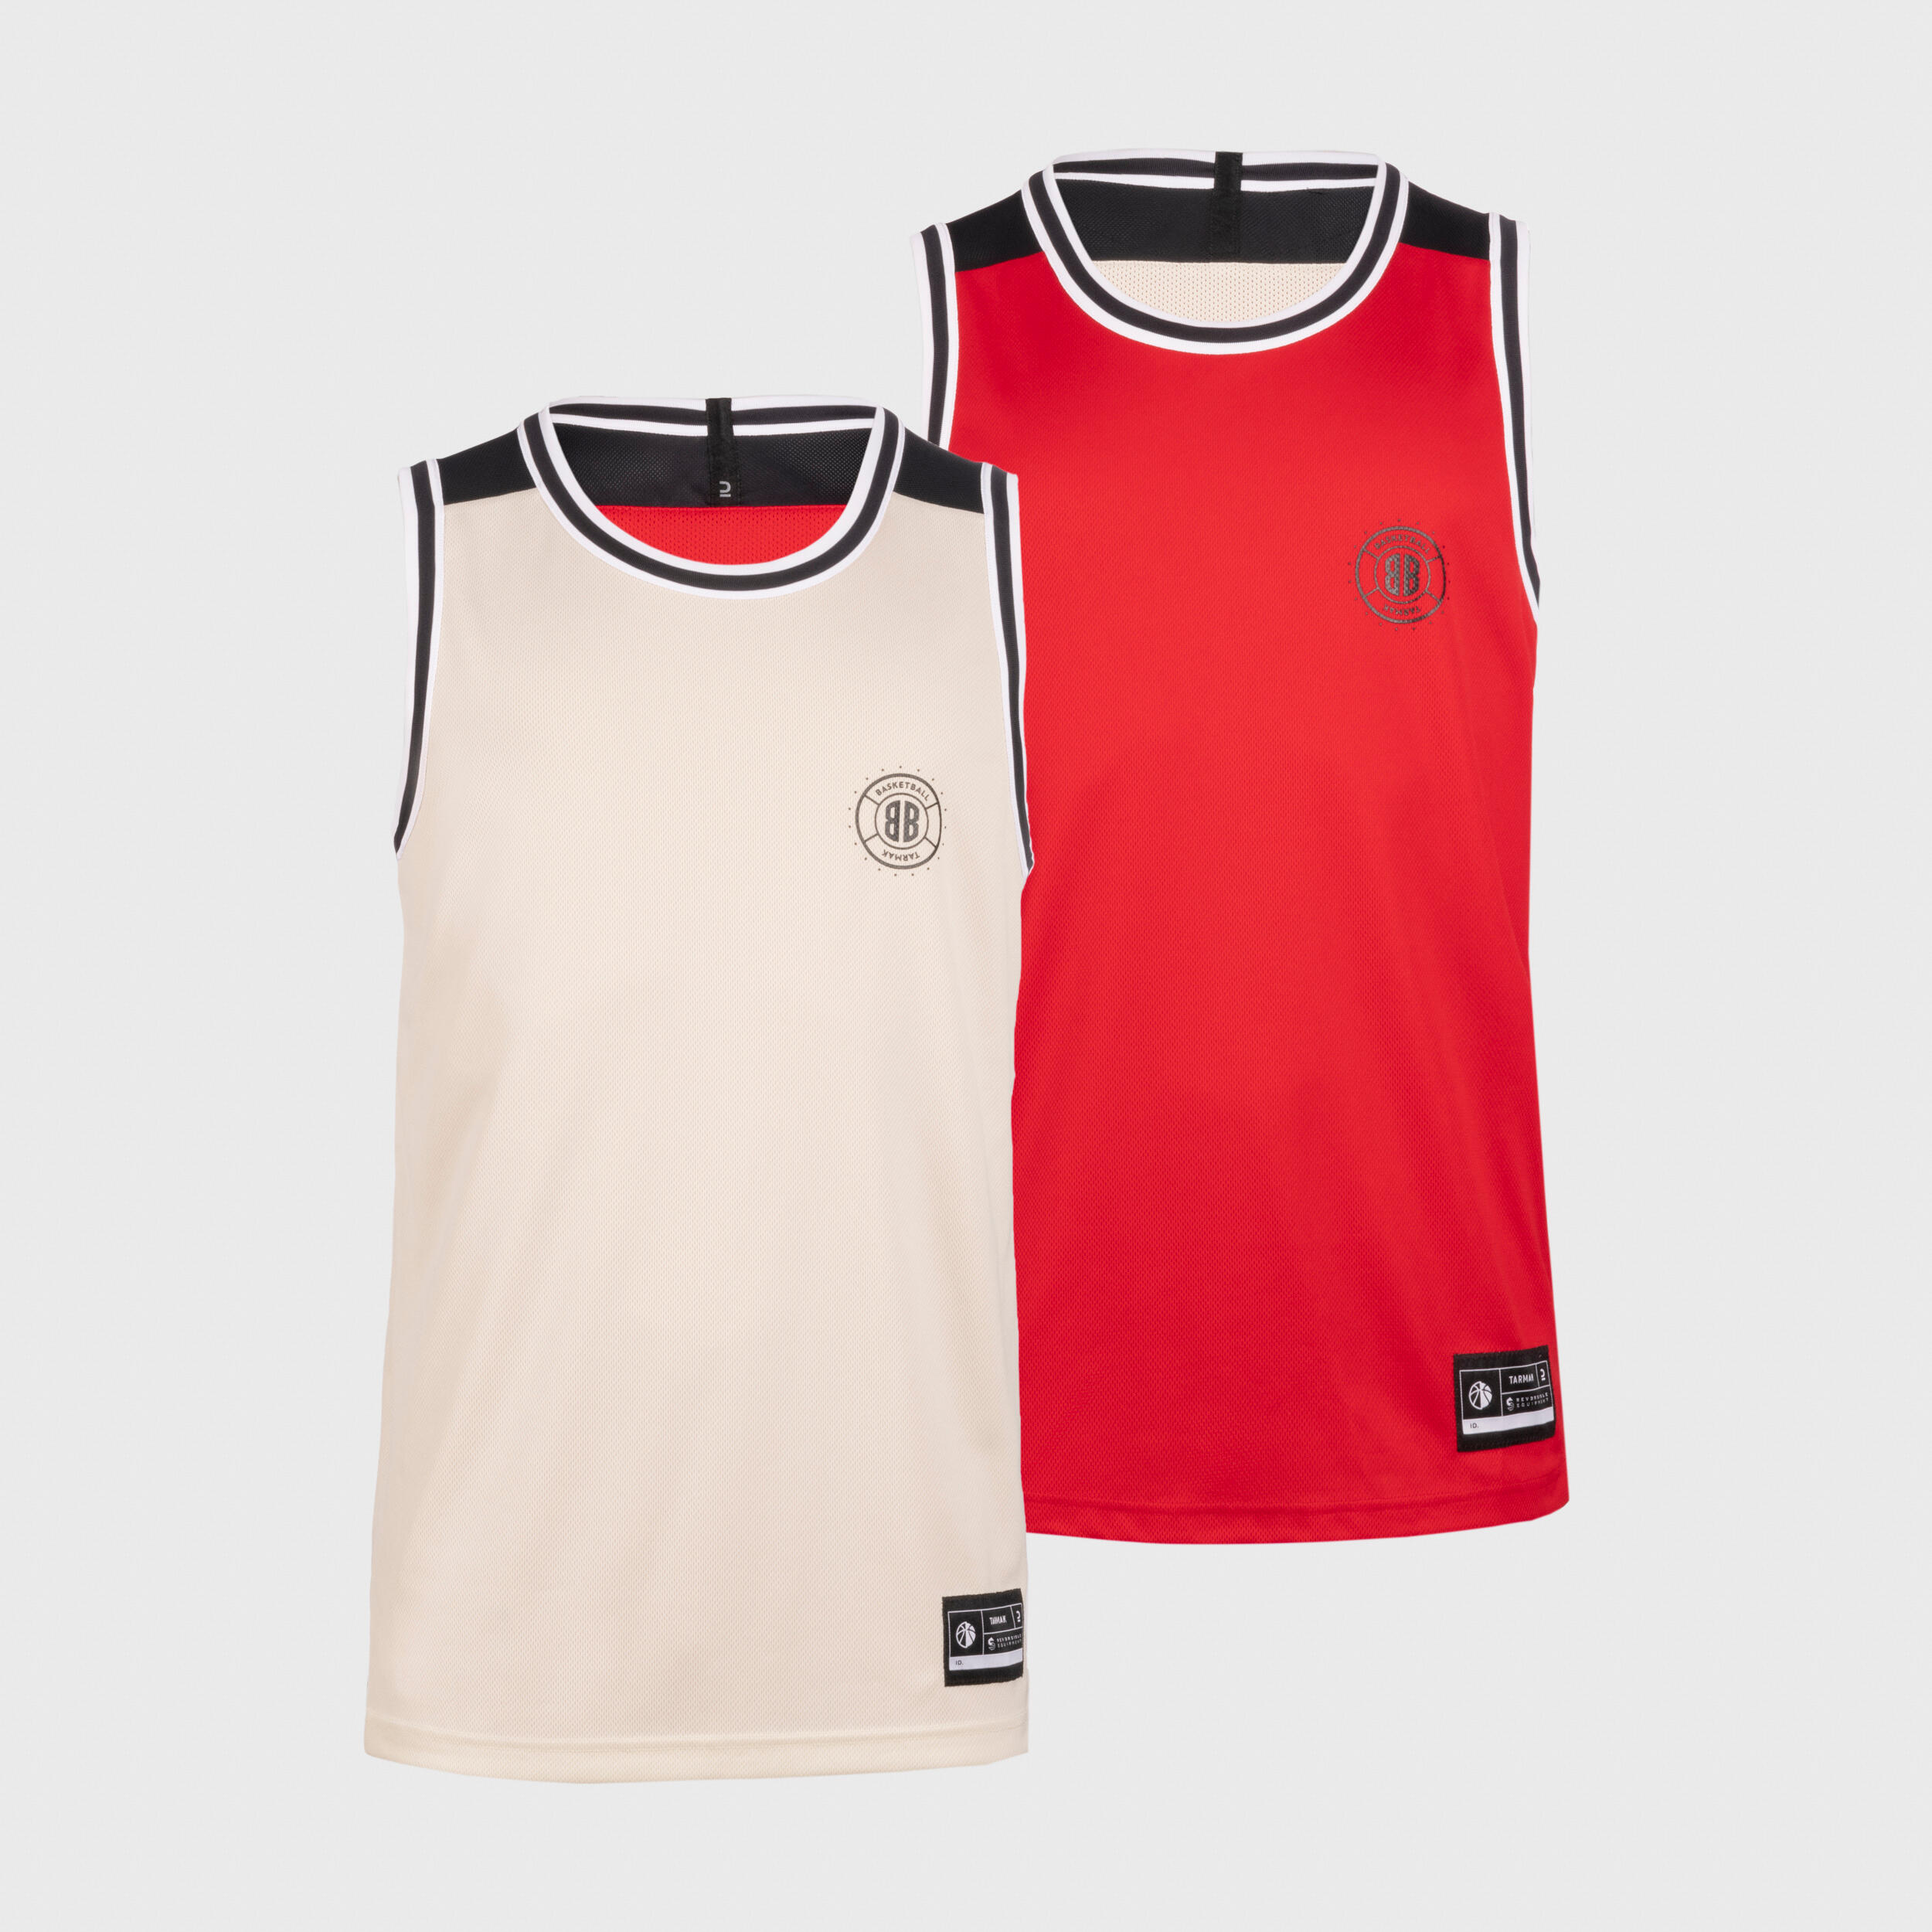 Adult 2-Way Sleeveless Basketball Jersey T500 - Red/Beige 4/9